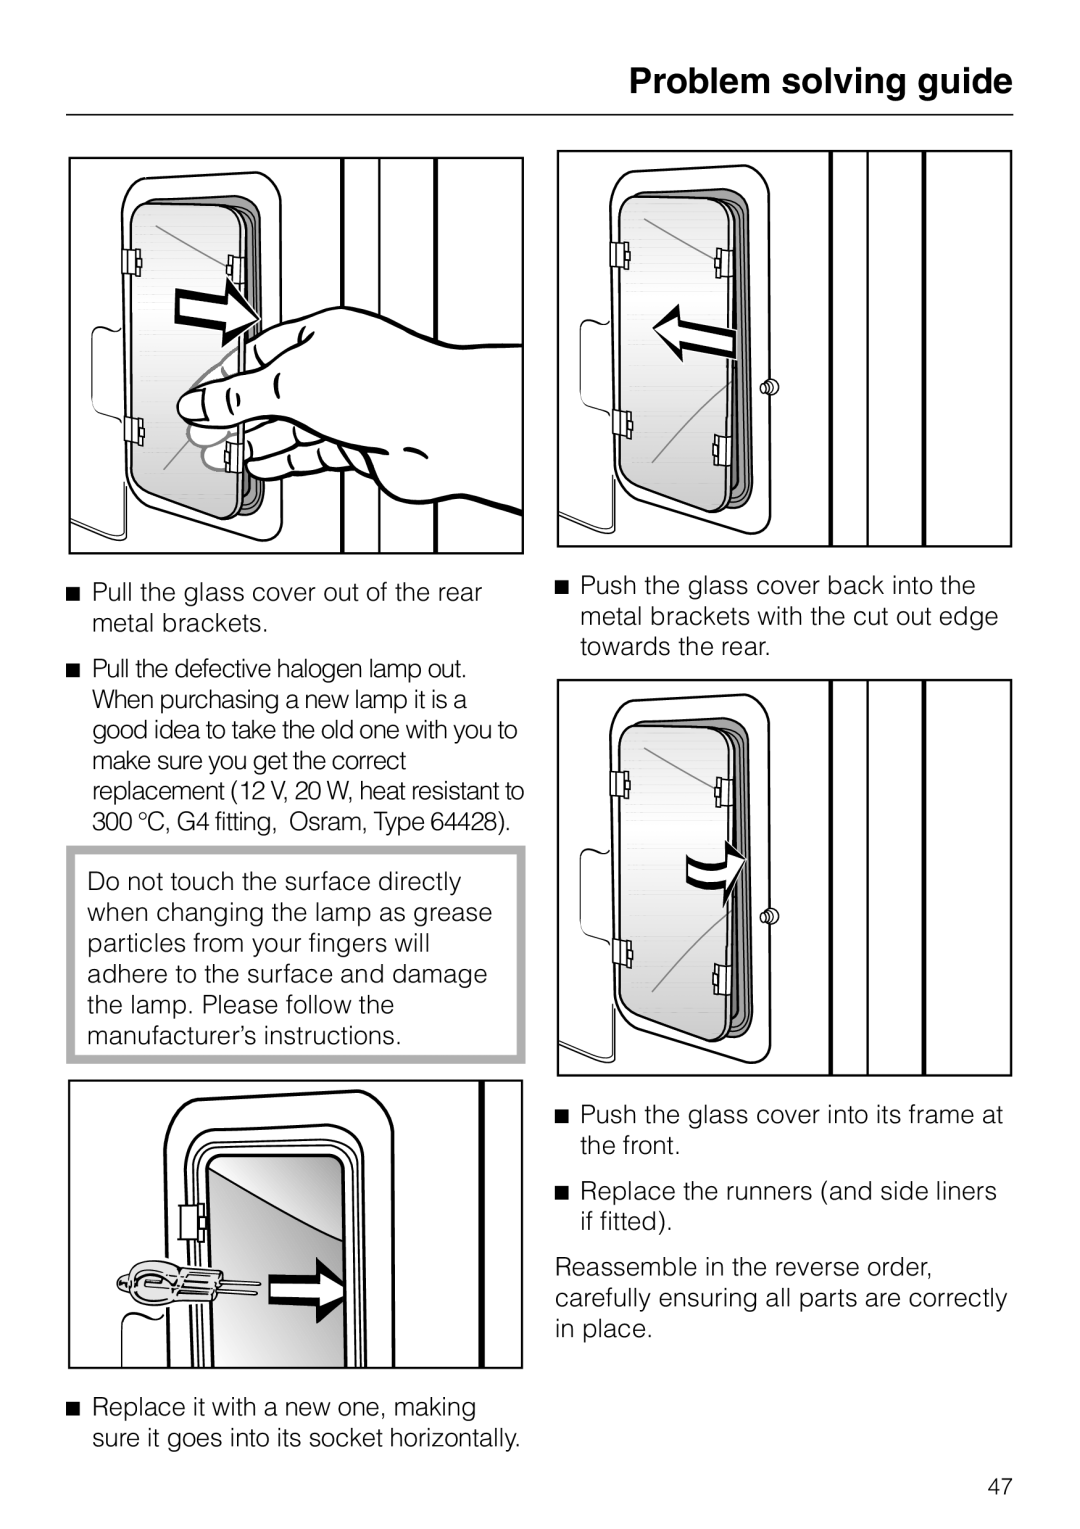 Miele H 4681 installation instructions Problem solving guide, Push the glass cover into its frame at the front 